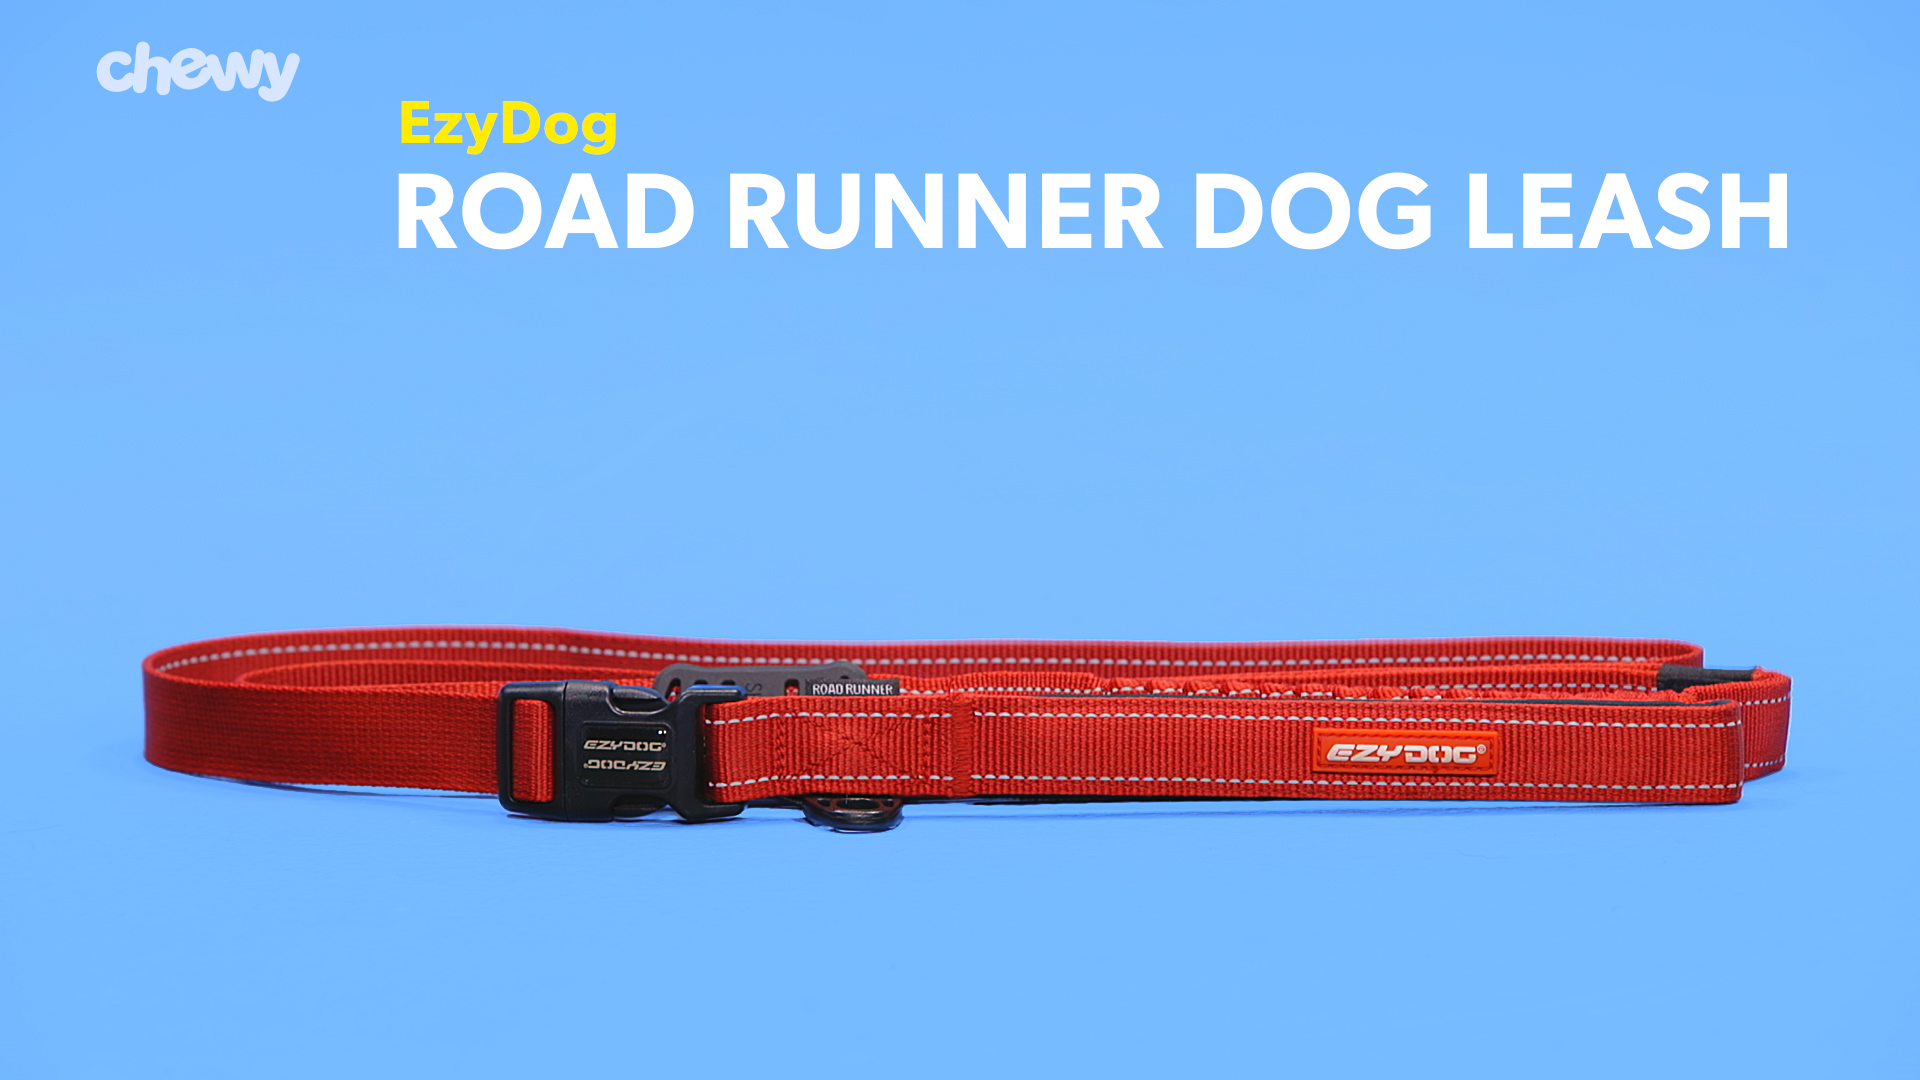 and Running Zero Shock Bungee Dog Leash with Reflective Stitching and Adjustable Waist Belt Jogging EzyDog Road Runner Hands Free Walking 